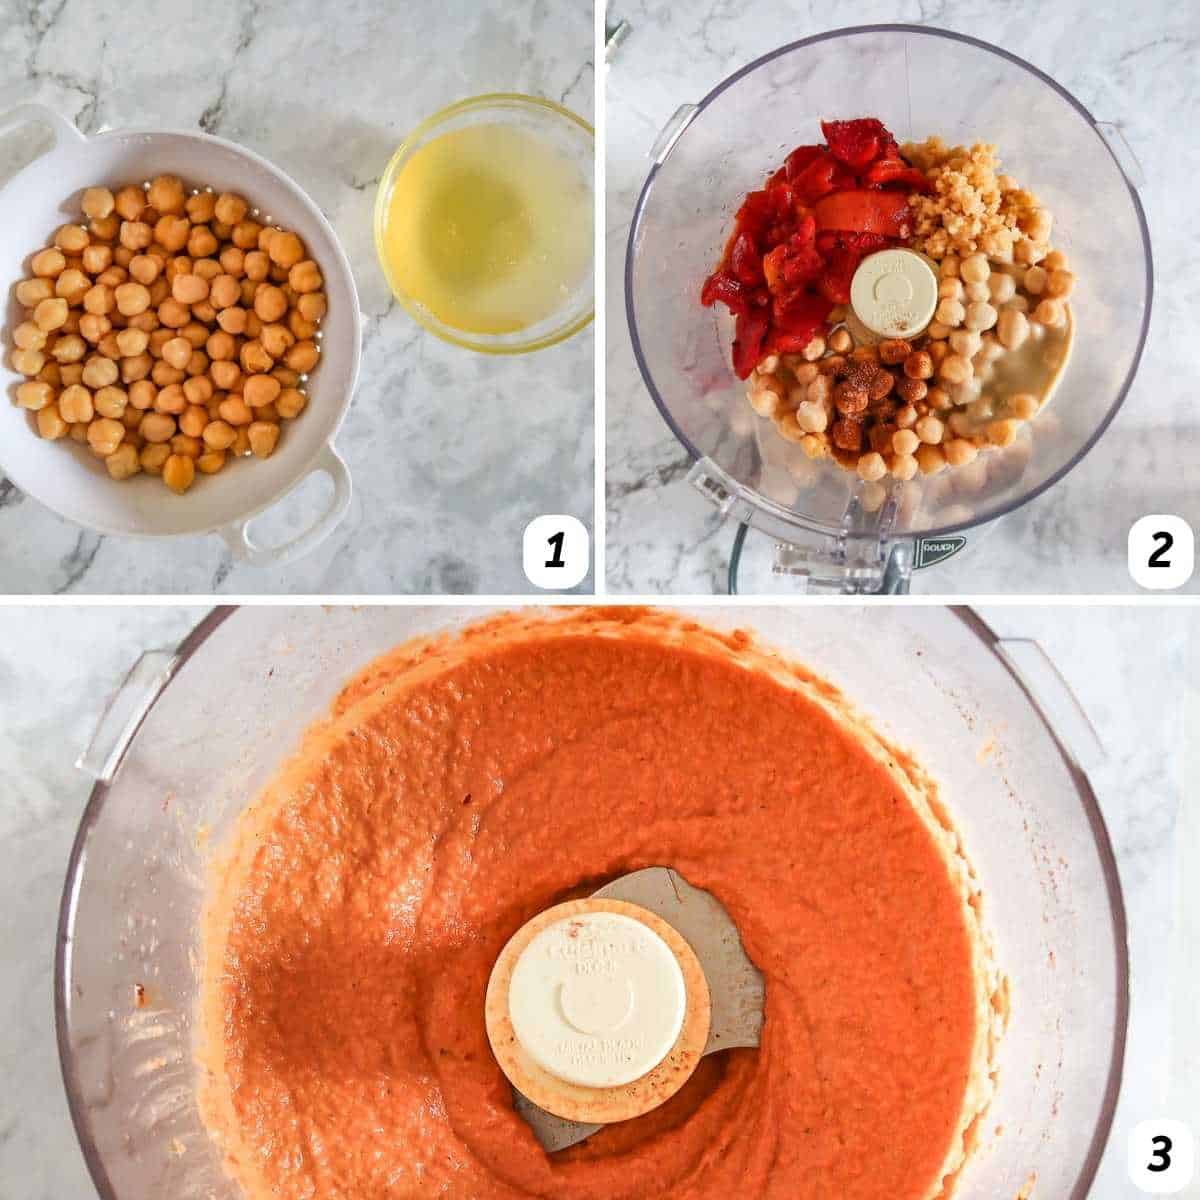 Three panel grid of process shots - straining chickpeas, squeezing lemon juice, and blending all ingredients in the food processor until smooth.